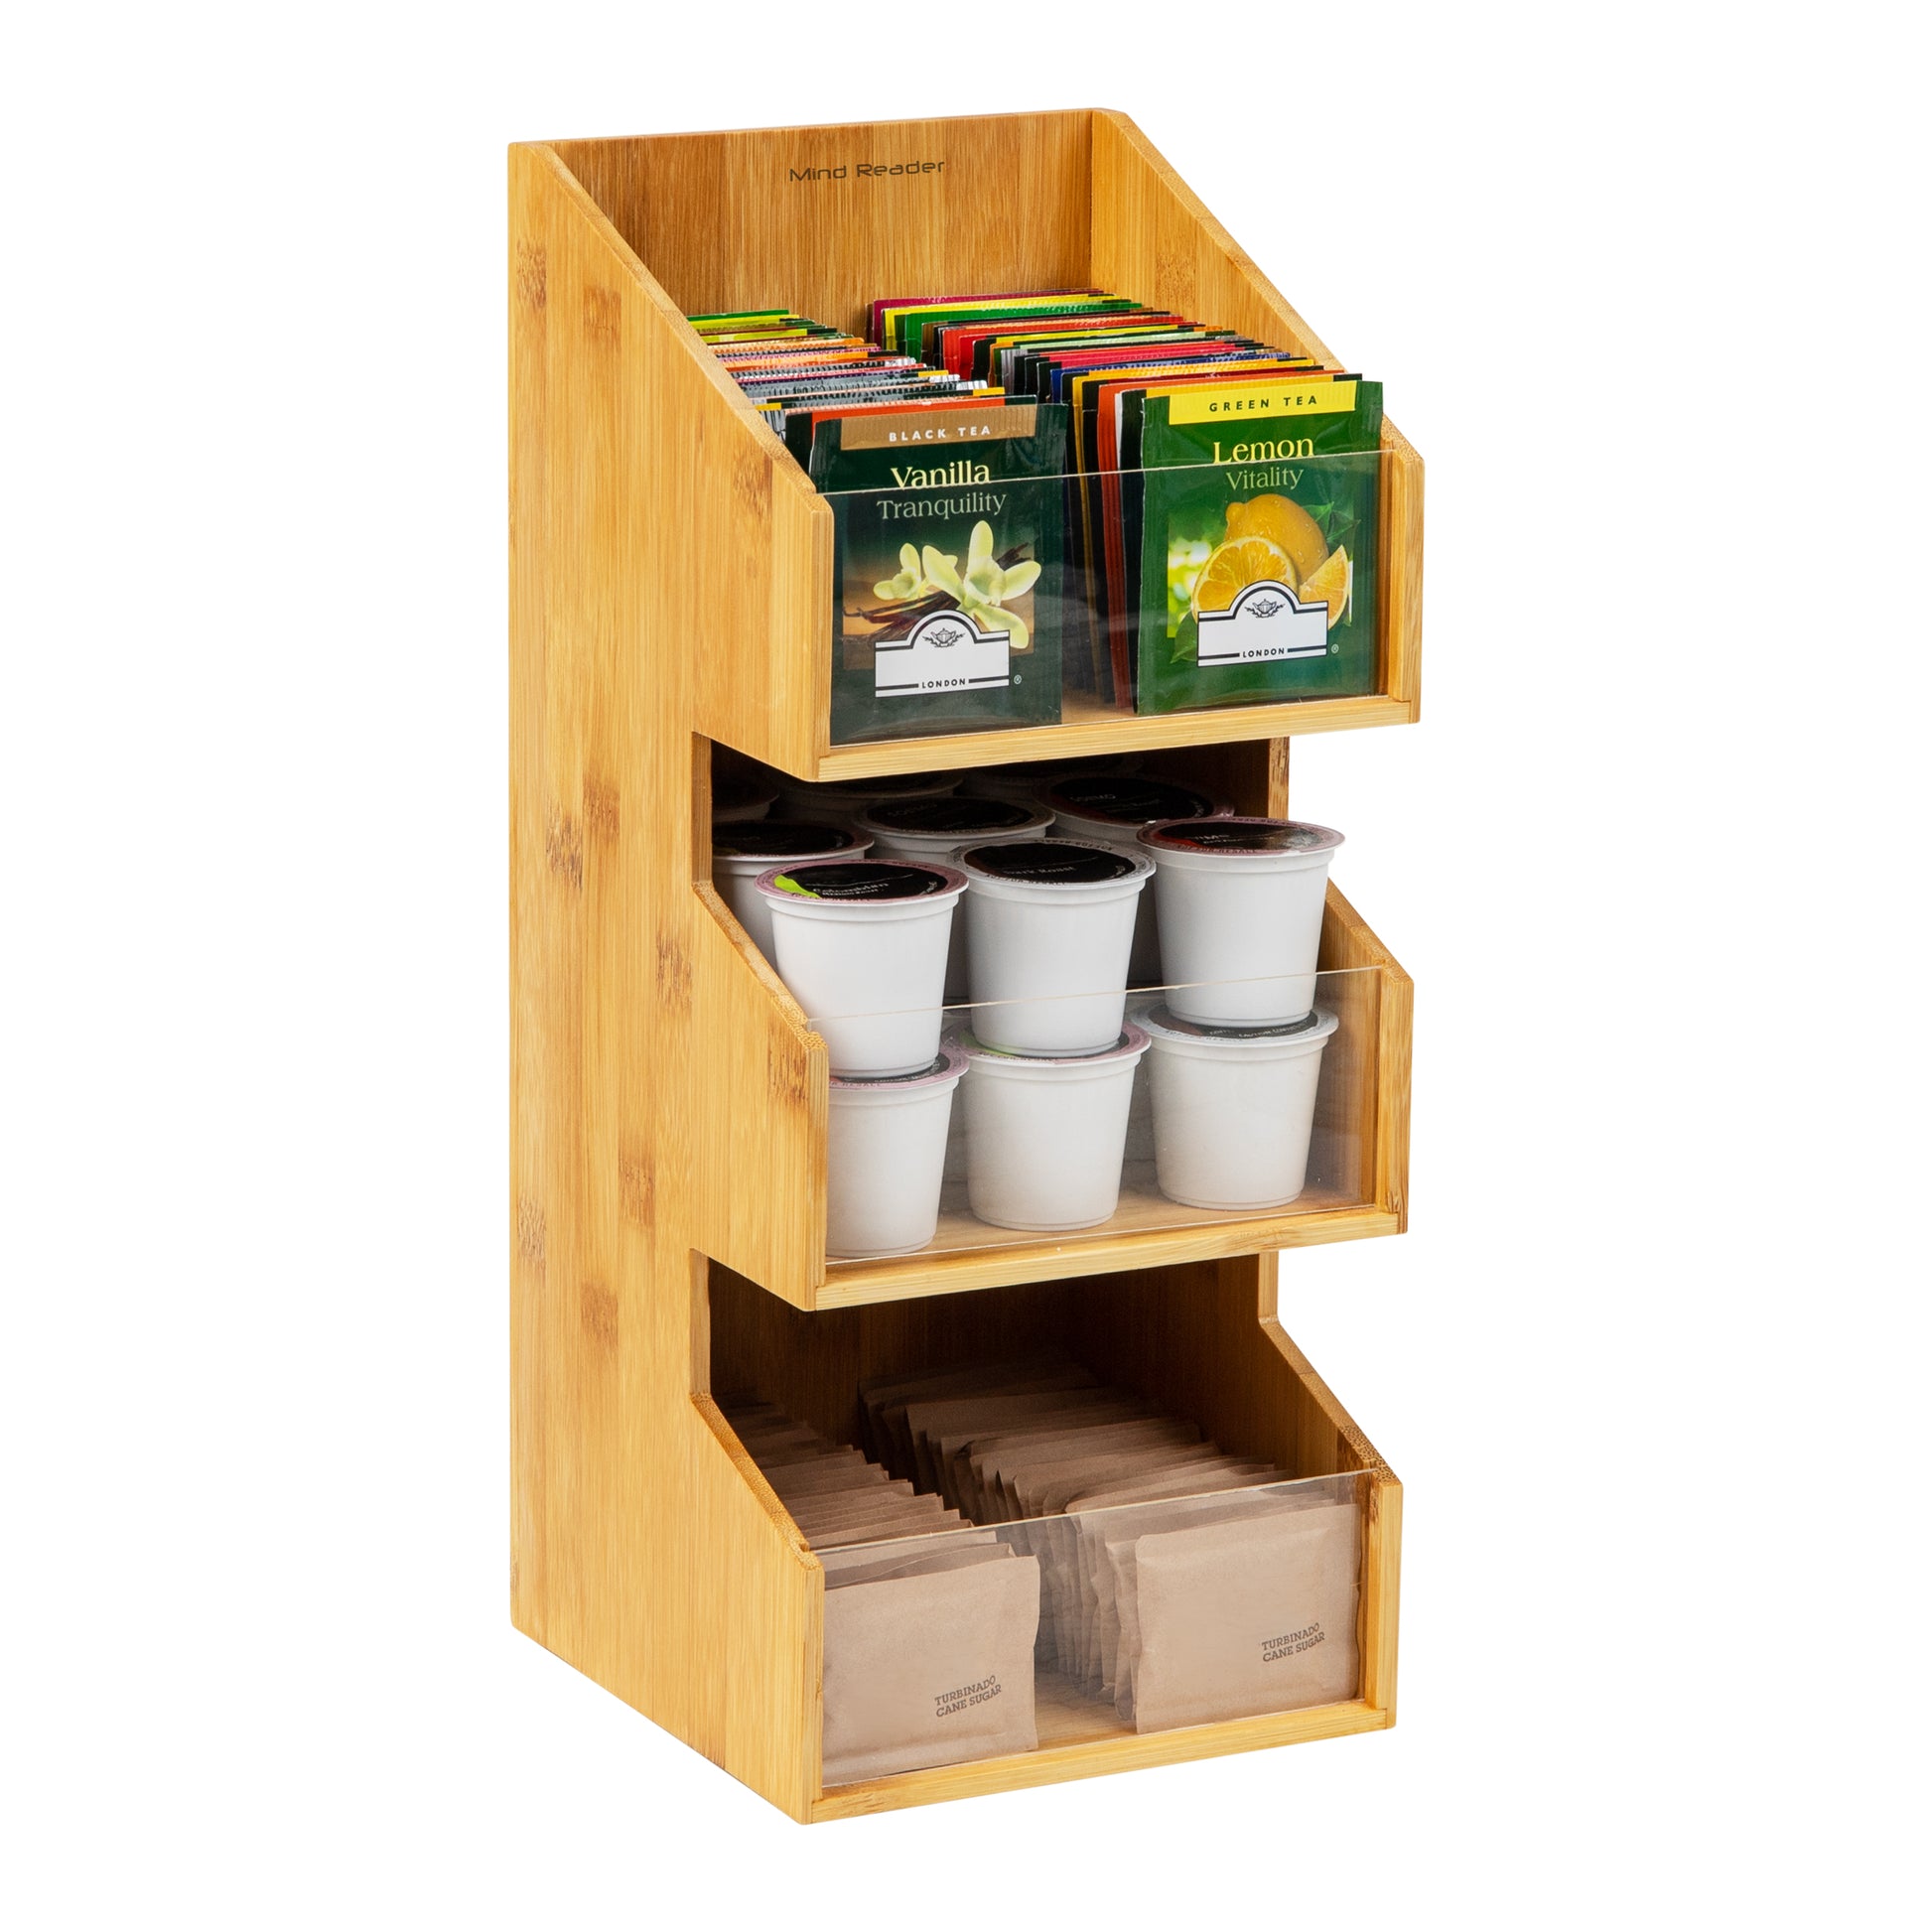  Spice Rack Organizer For Cabinet - 3 Tier Black Bamboo